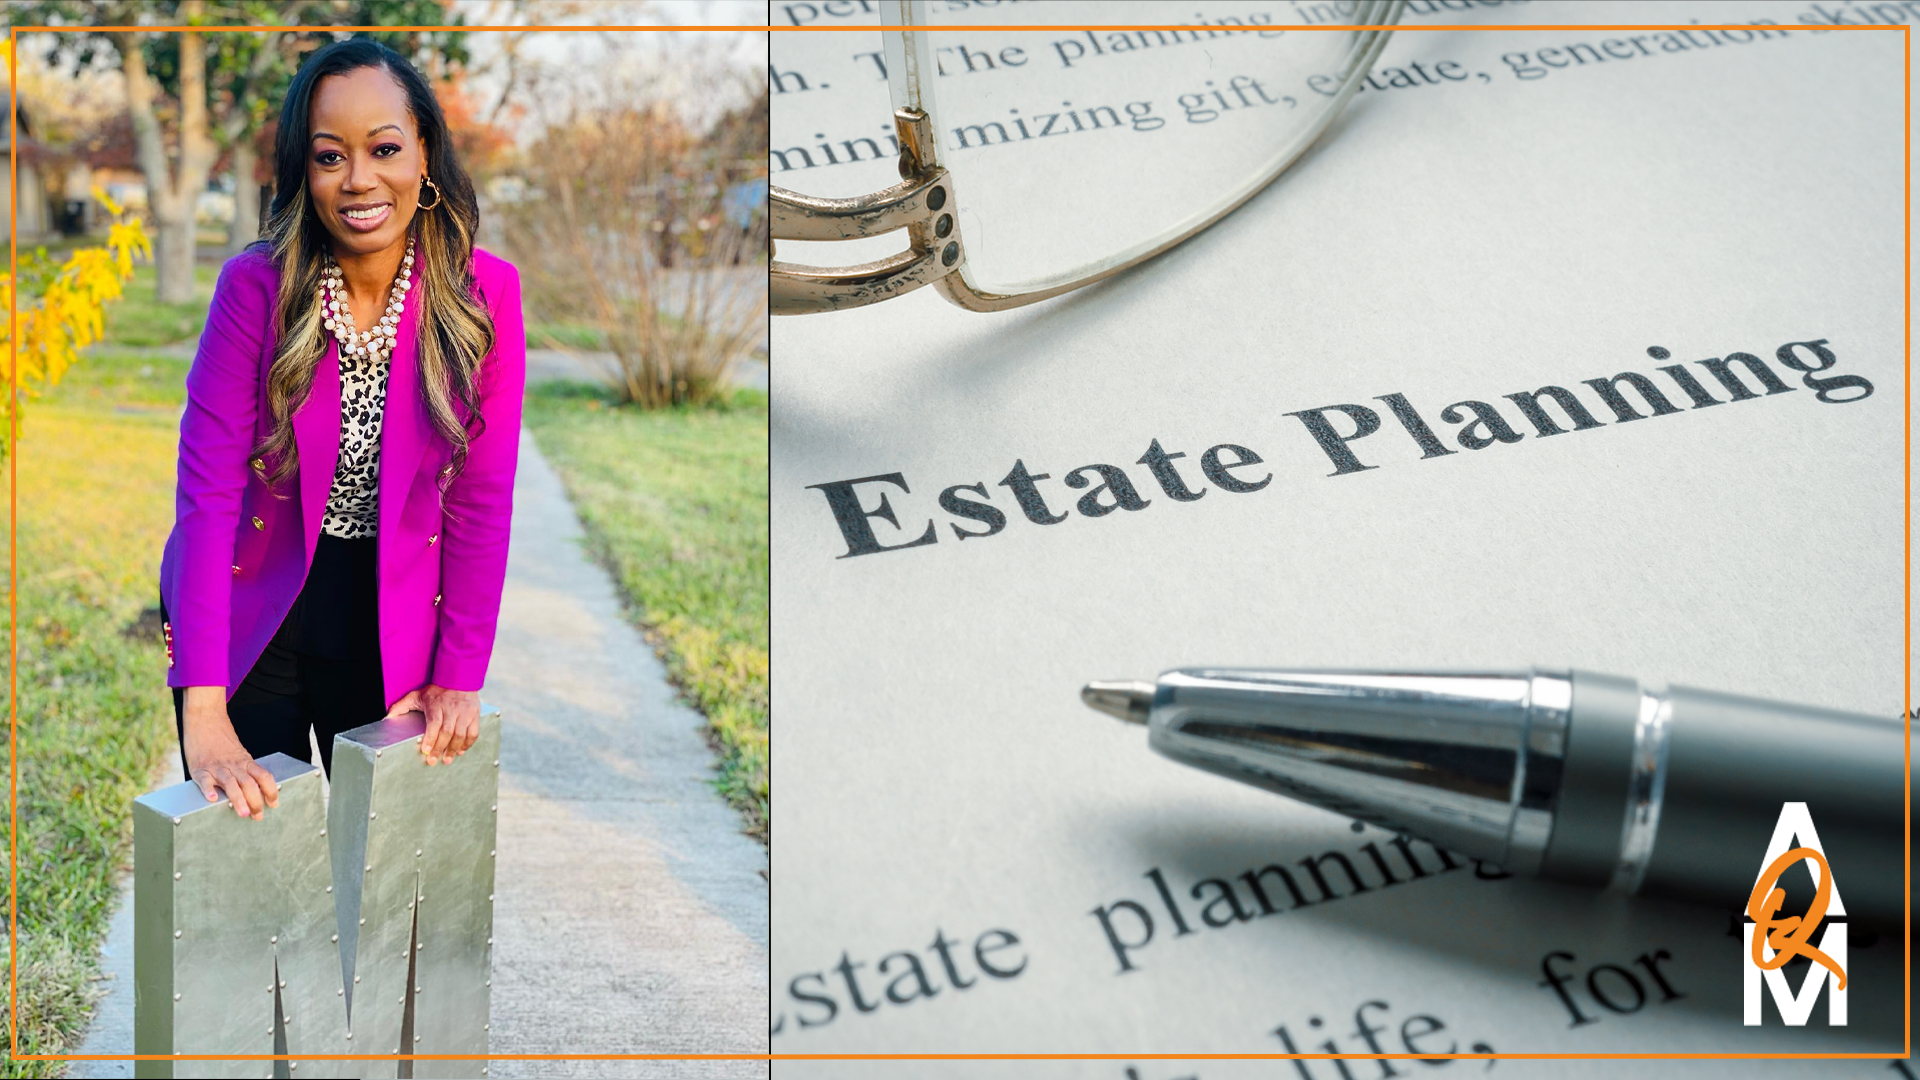 What You Should Know About Probate And Estate Planning